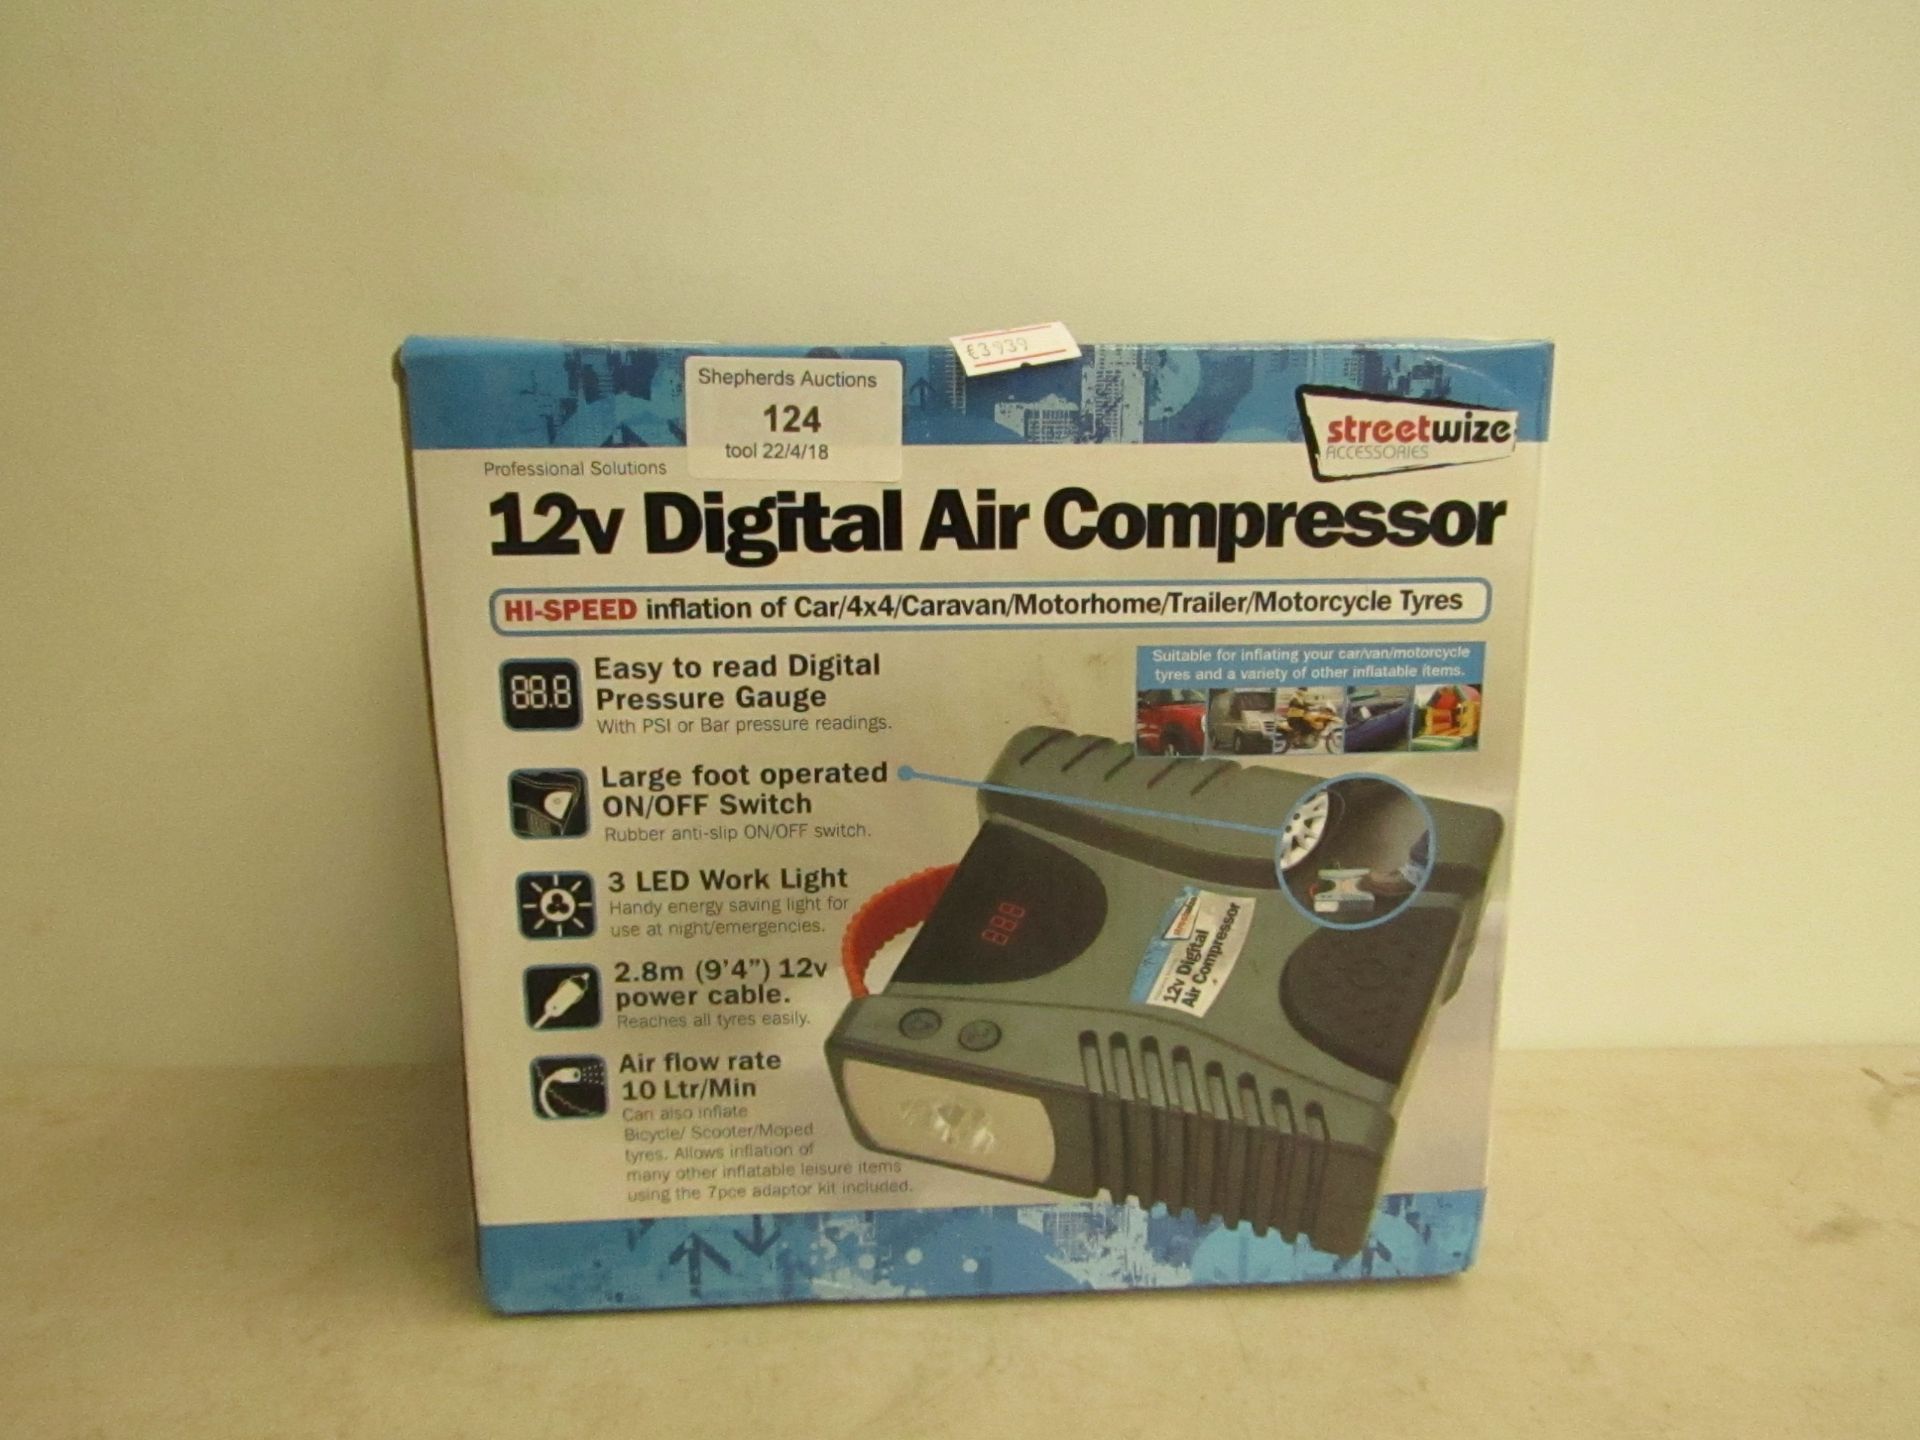 Streetwize 12v digital air compressor, boxed and unchecked